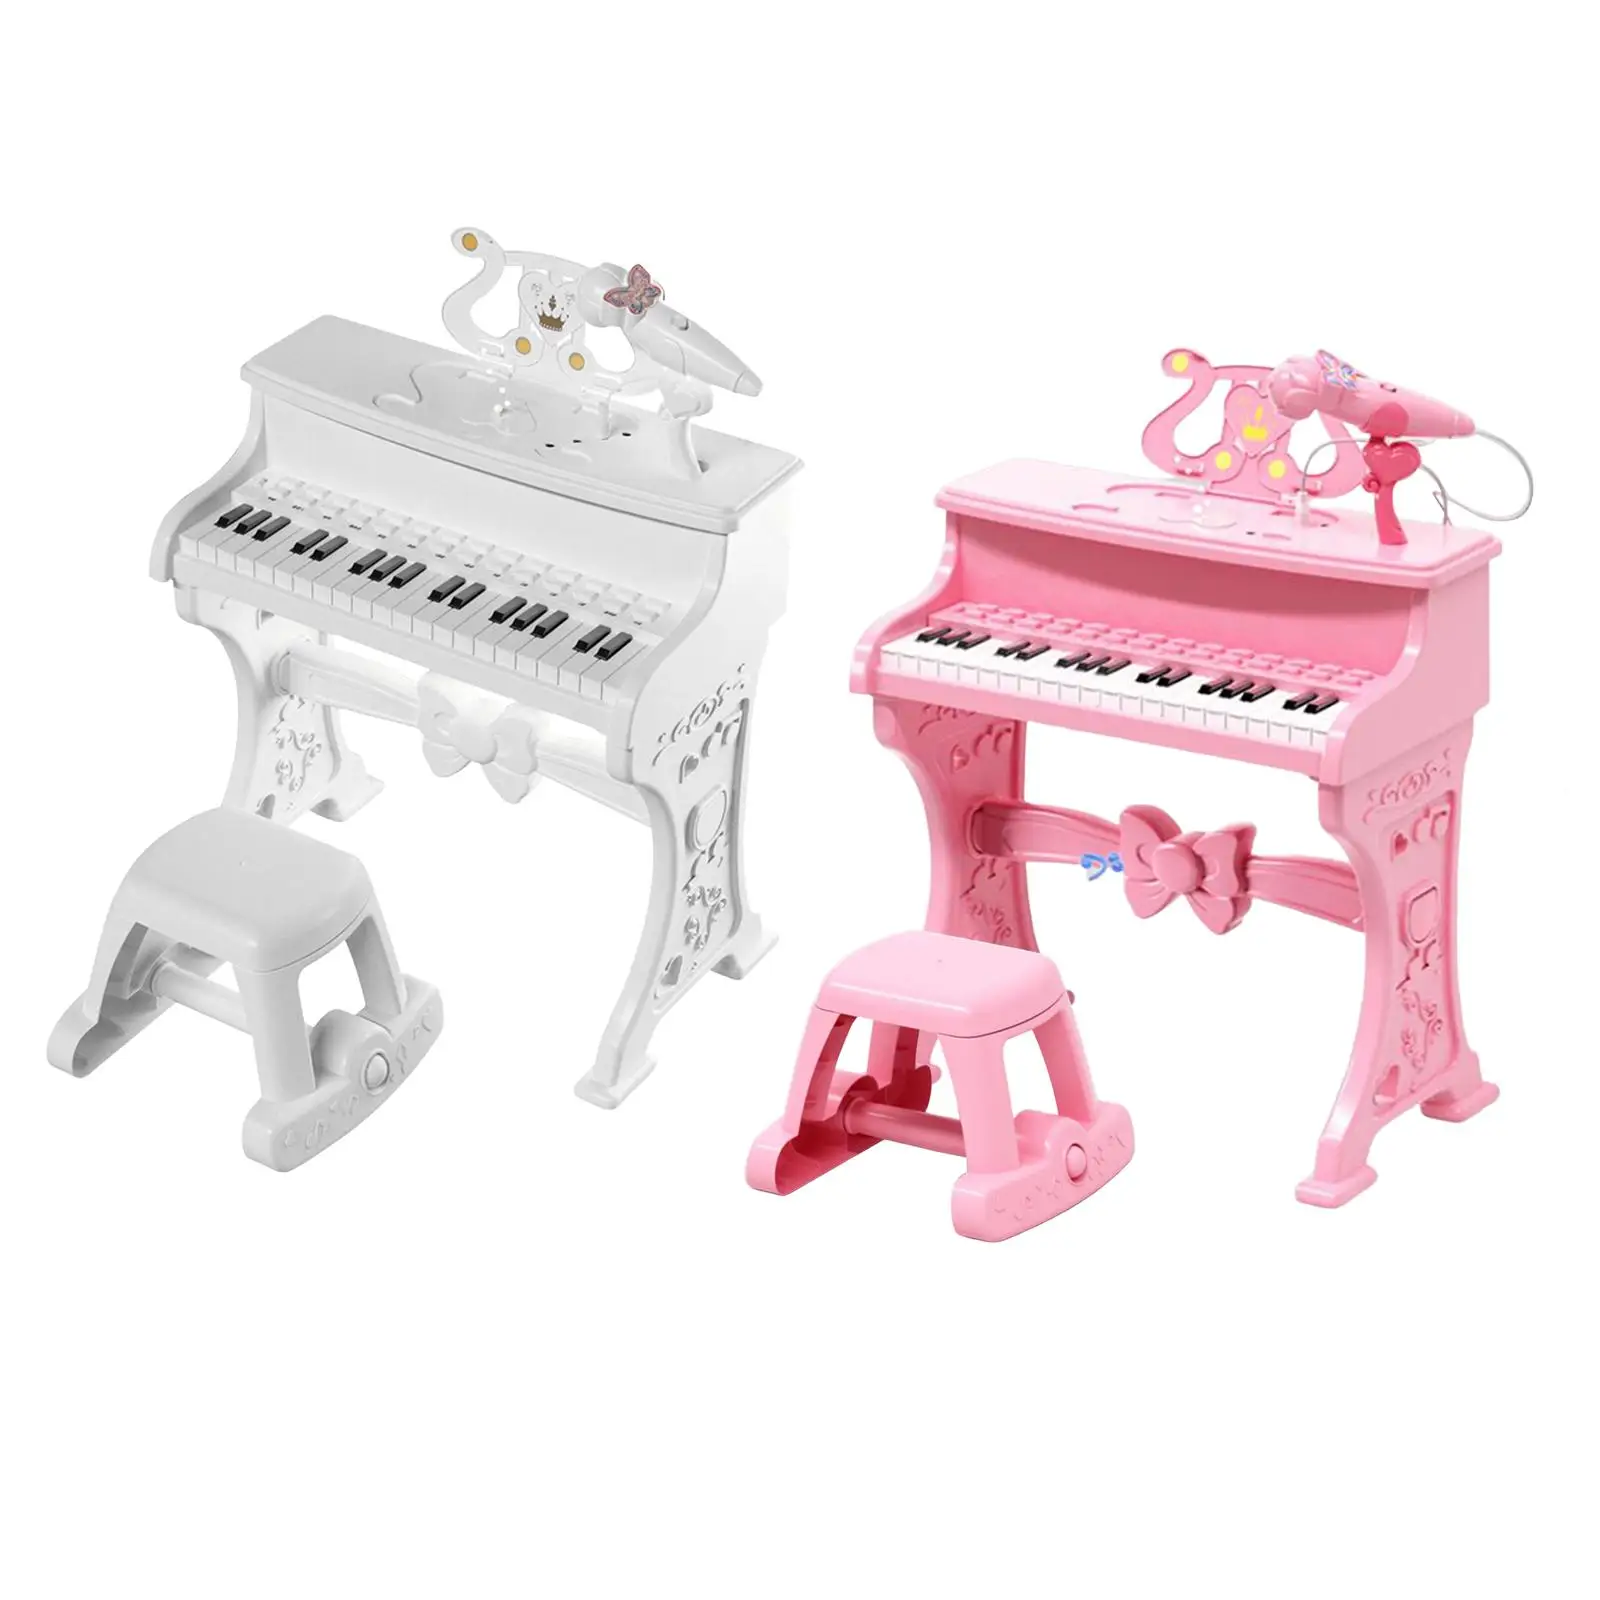 Musical Electric Toy Educational Musical with Microphone for Play Birthday Girls